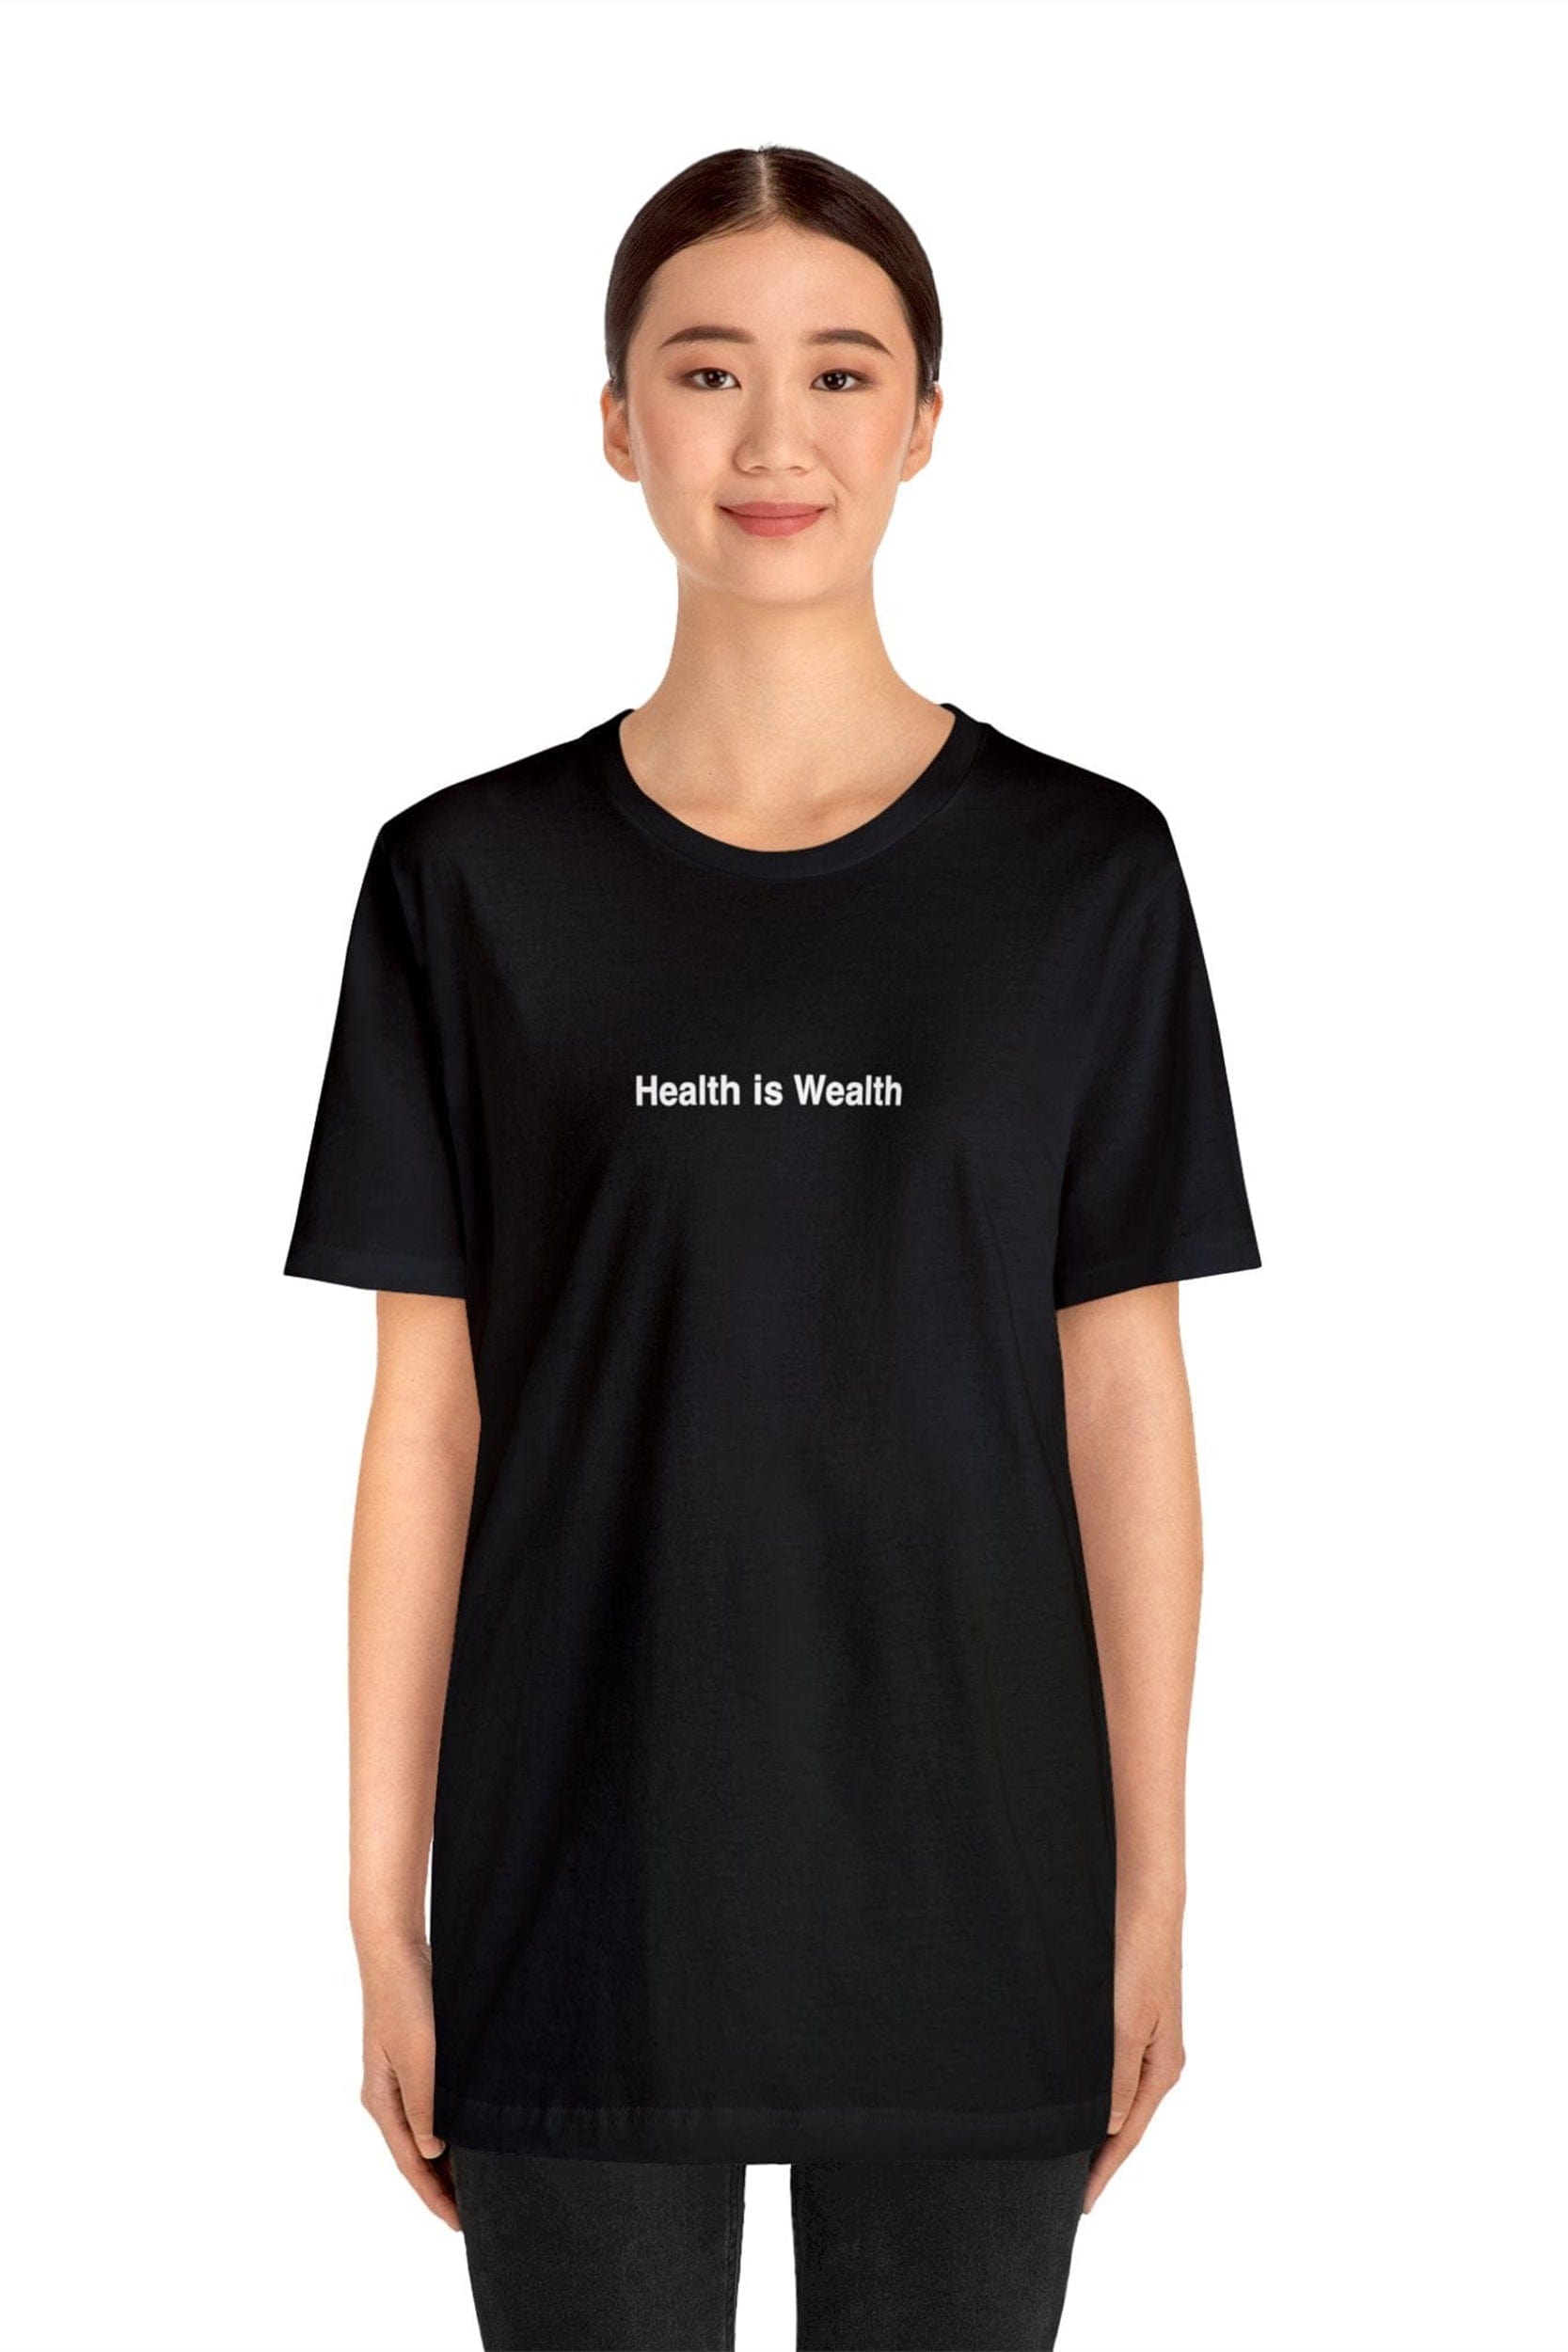 "Health is Wealth" T-Shirt